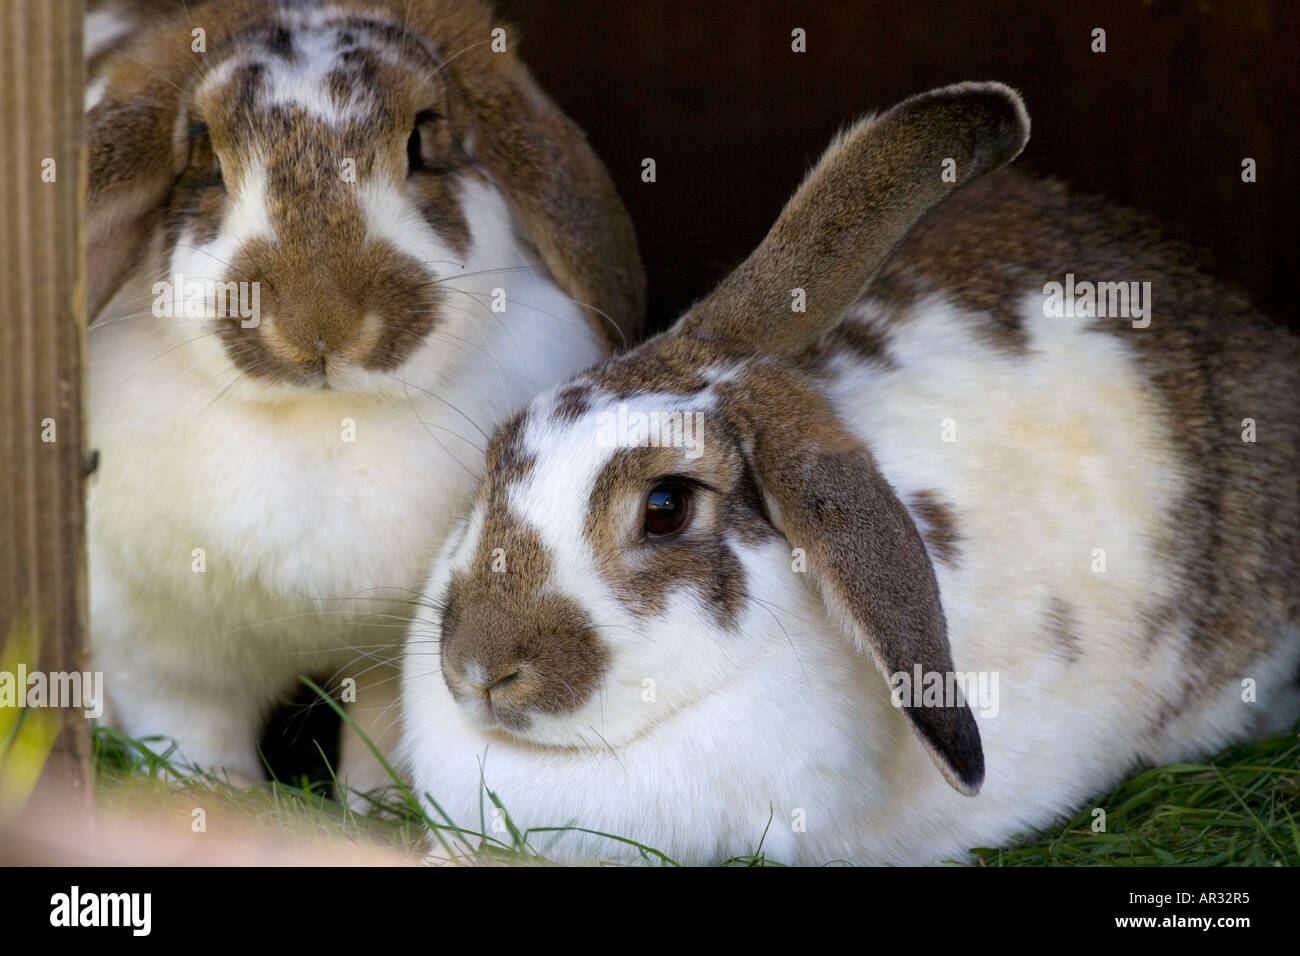 Lop Eared Rabbits Stock Photo